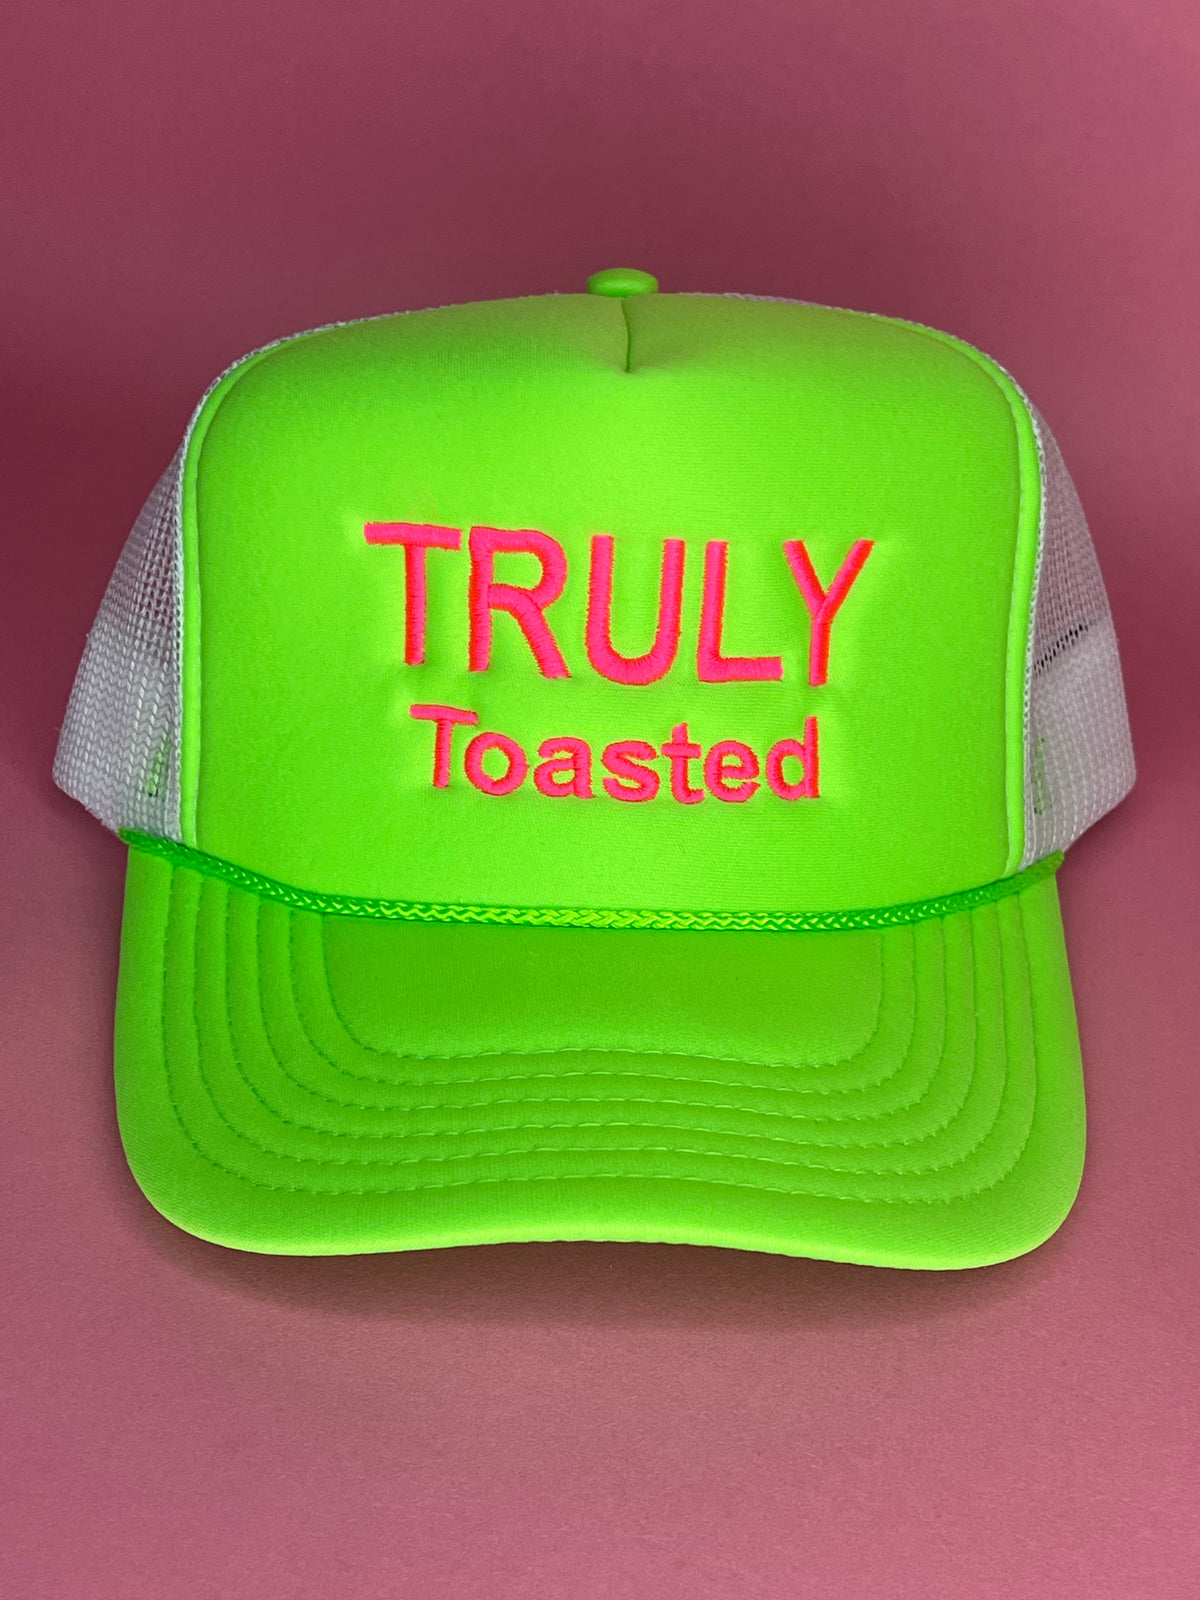 Truly Toasted Trucker Hat